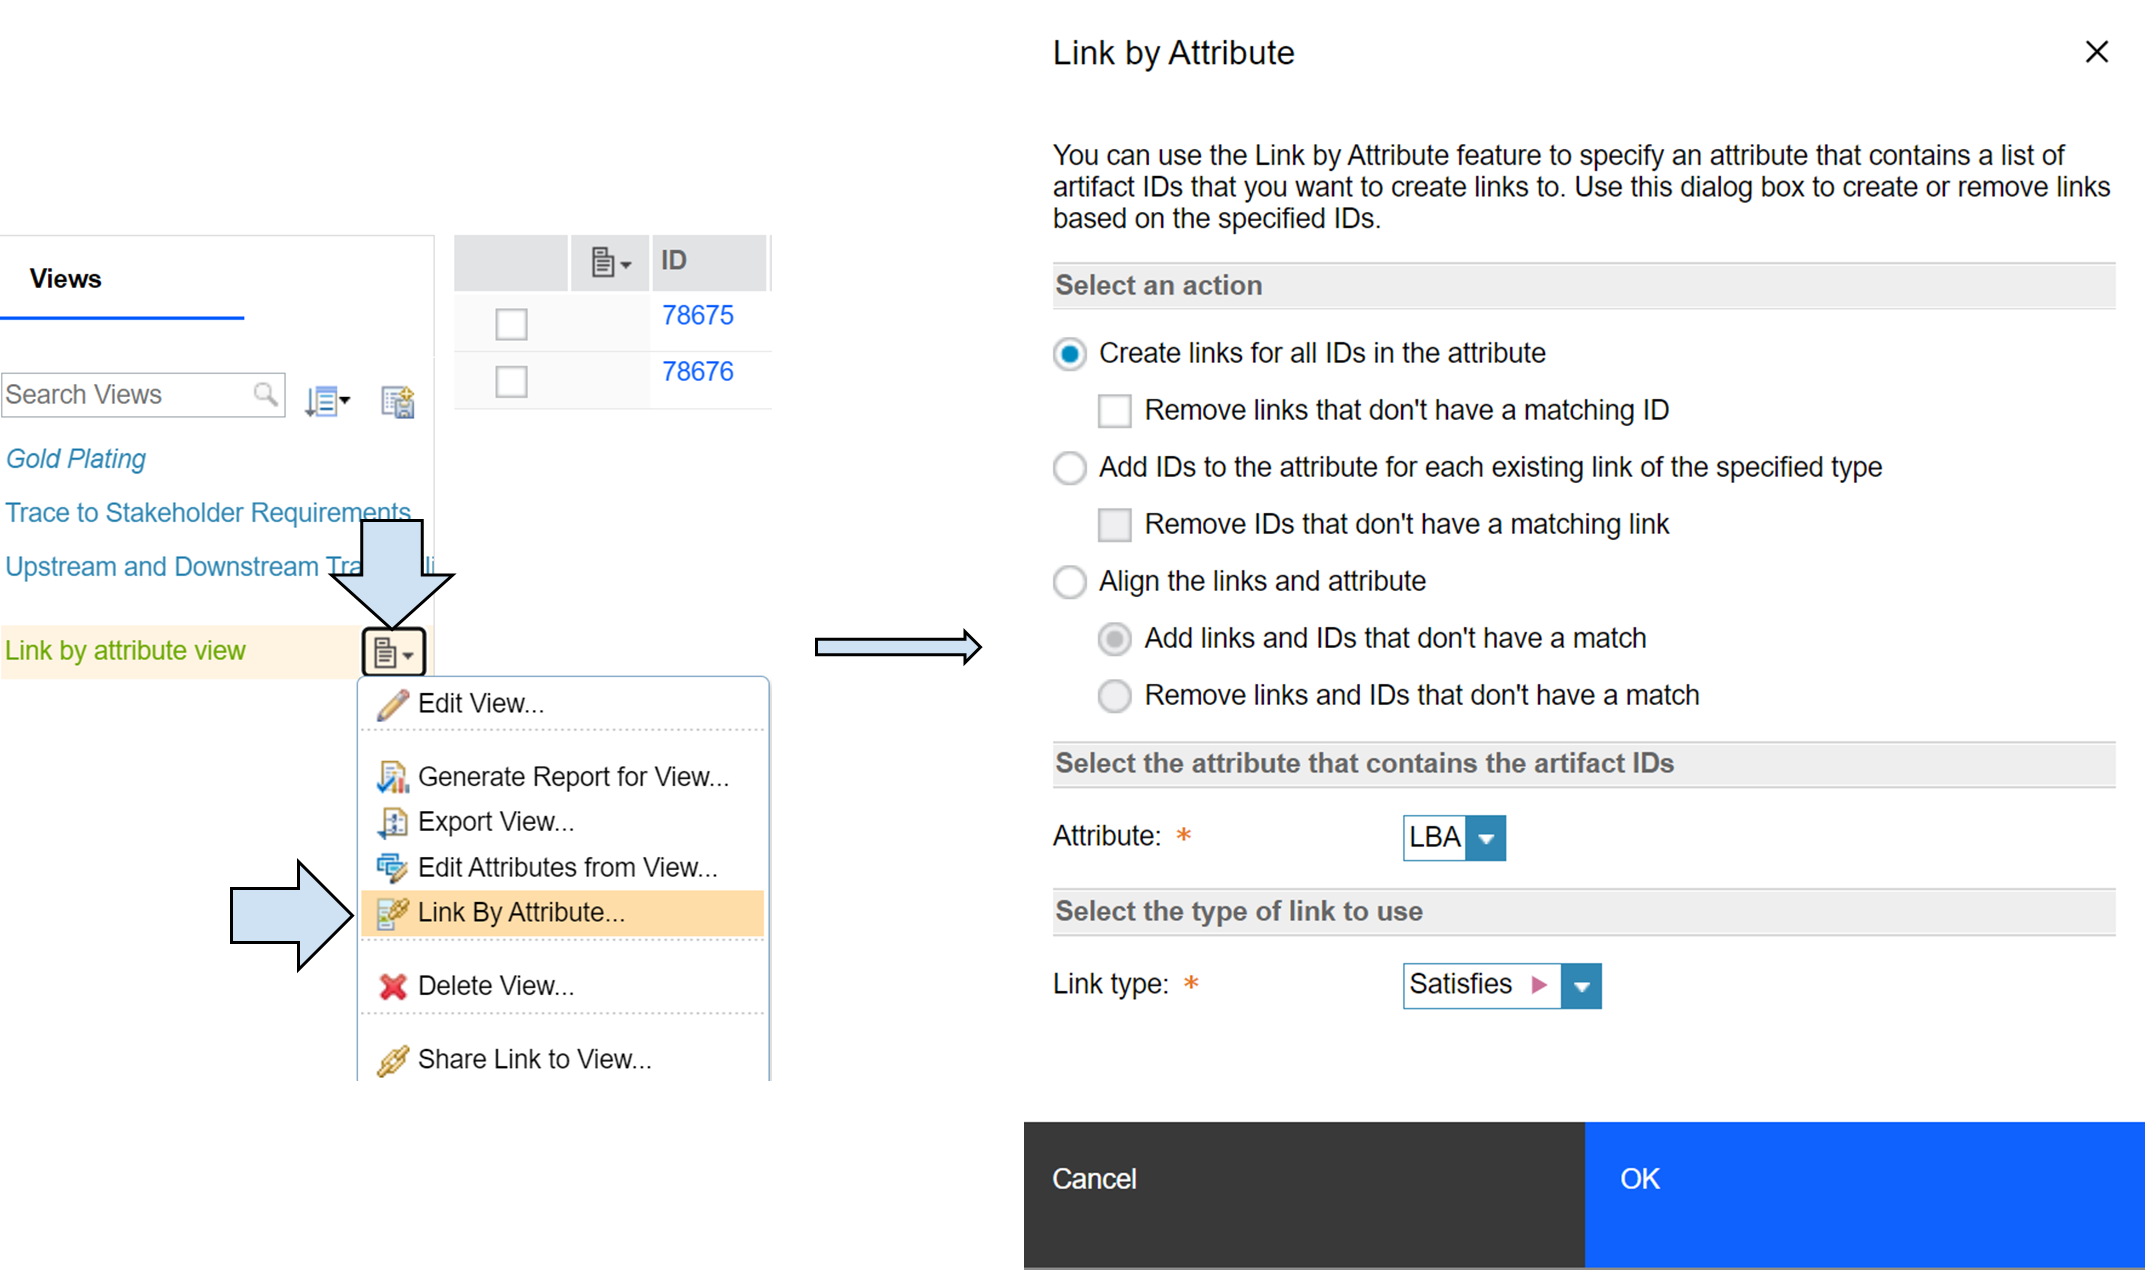 View options is on the right side, link by attribute is between Edit Attributes and Delete View